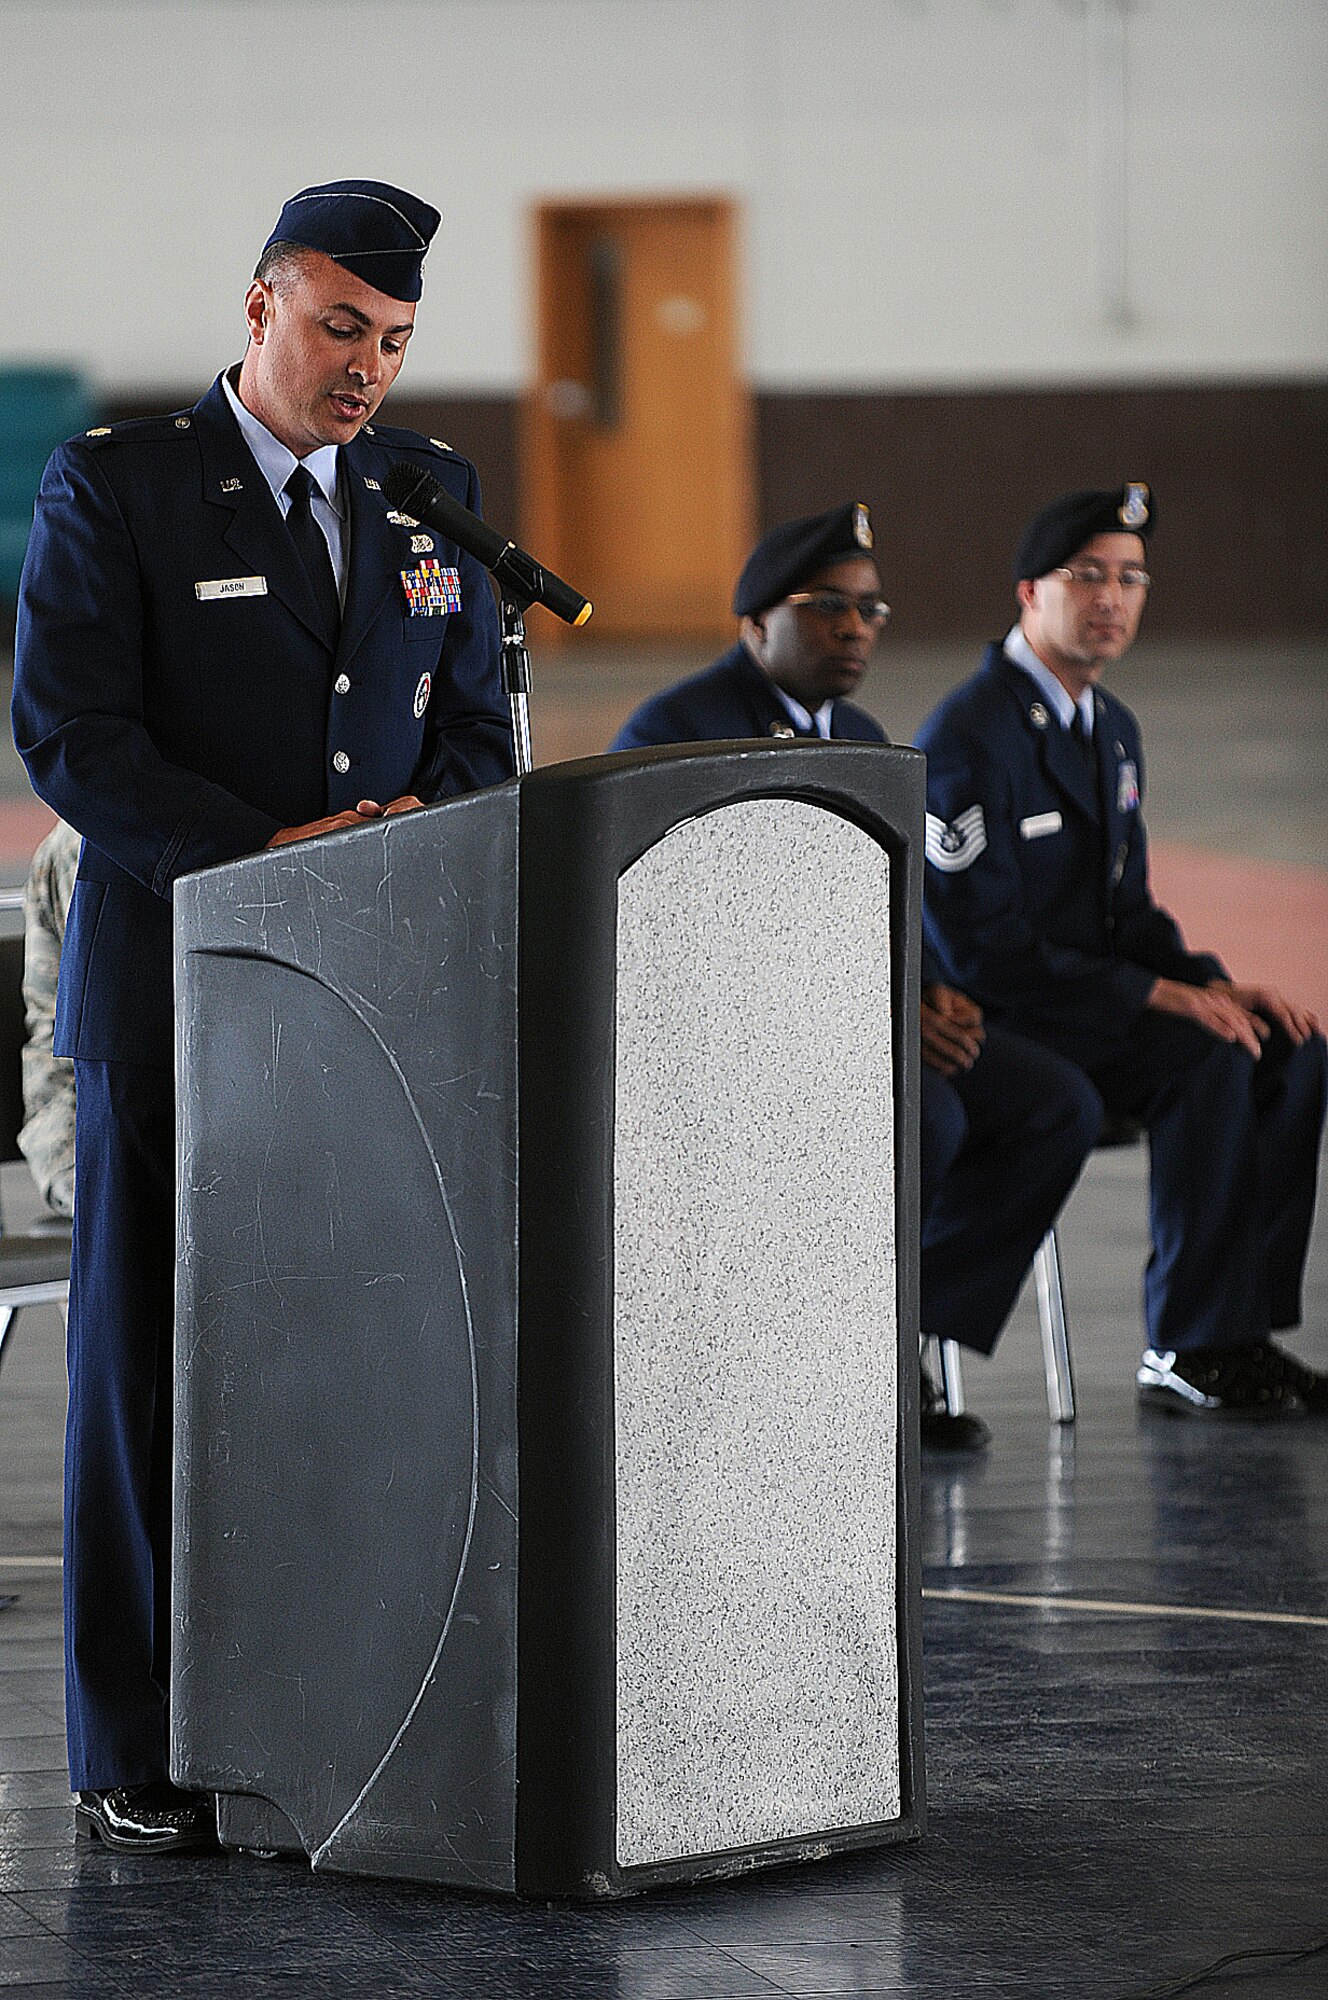 Lt. Col. Michael Jason, 28th Bomb Wing director of staff, speaks during a National Police Week retreat here, May 13. National Police Week has honored fallen local, state and federal officers for 46 years. (U.S. Air Force photo/Airman 1st Class Joshua J. Seybert)